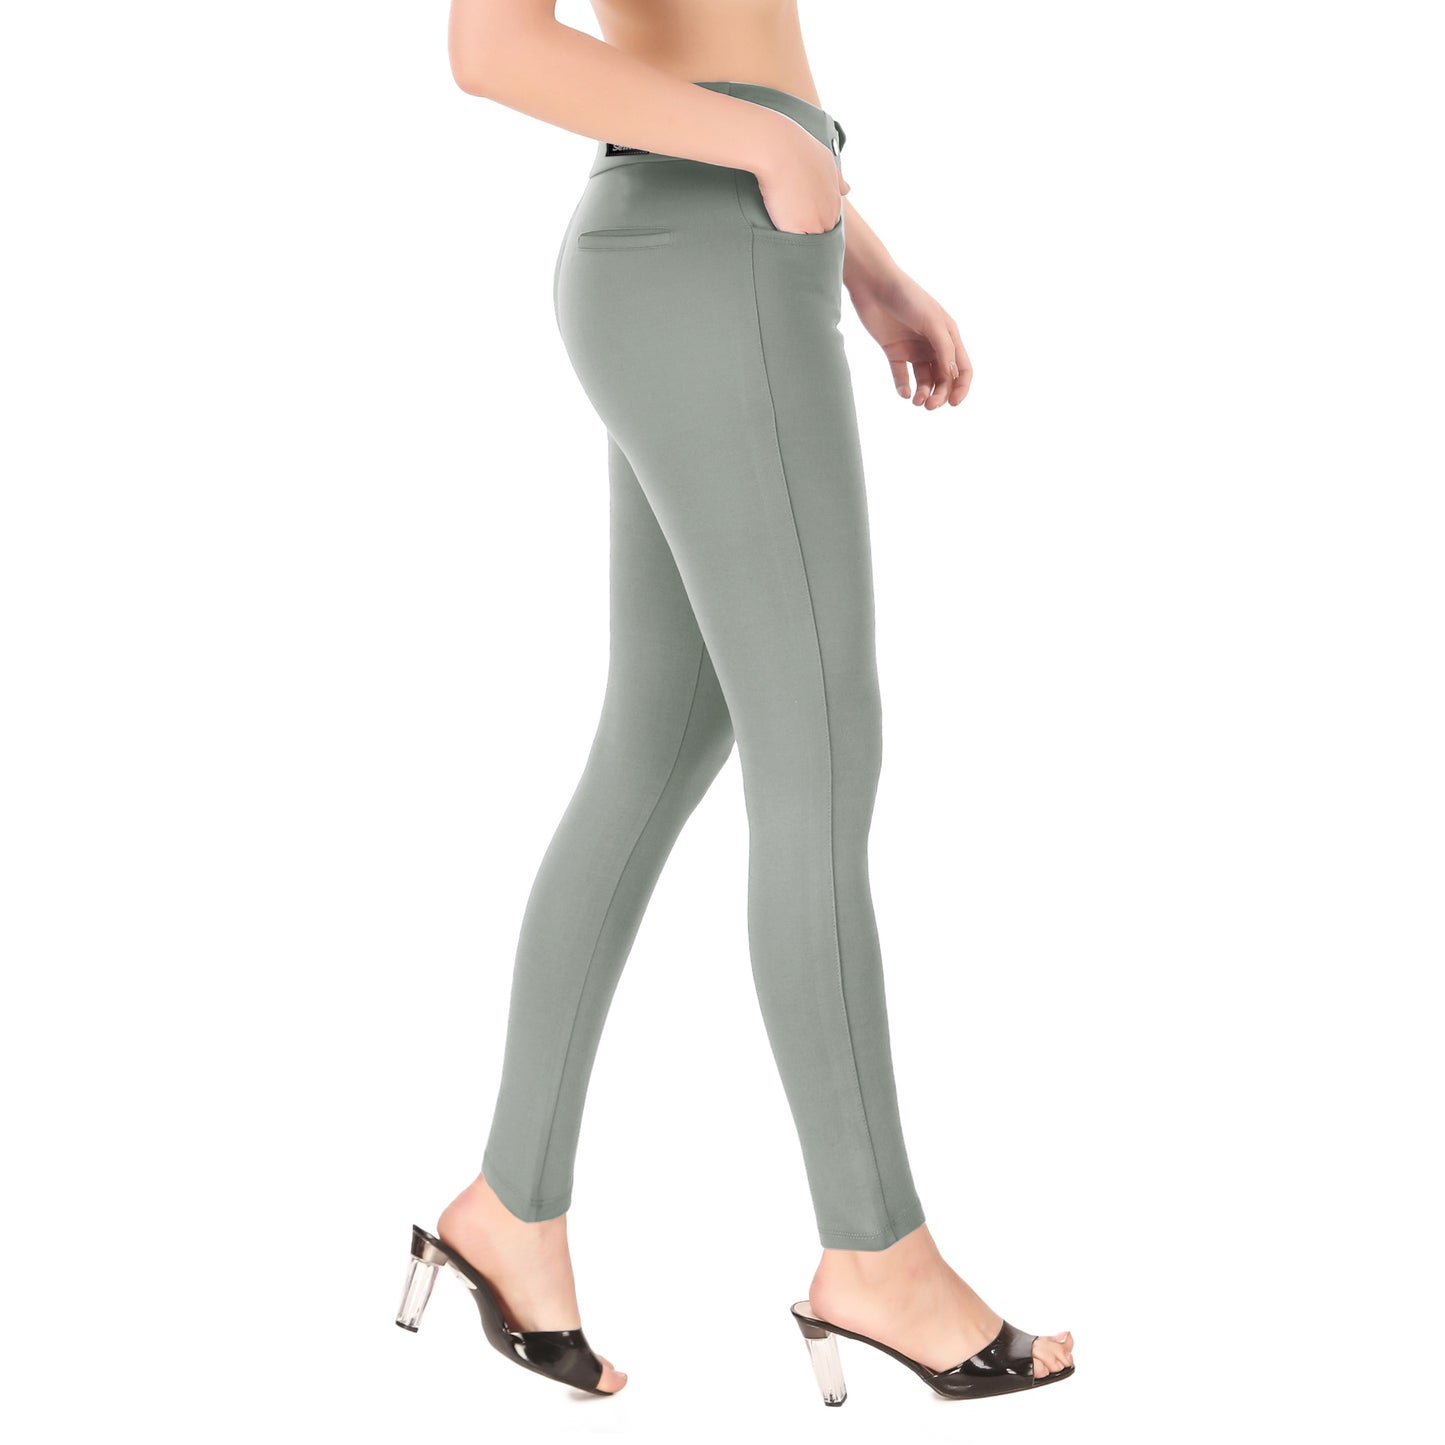 Most Comfortable Women's Mid-Waist Jeggings with 2 Front Pockets - Silver